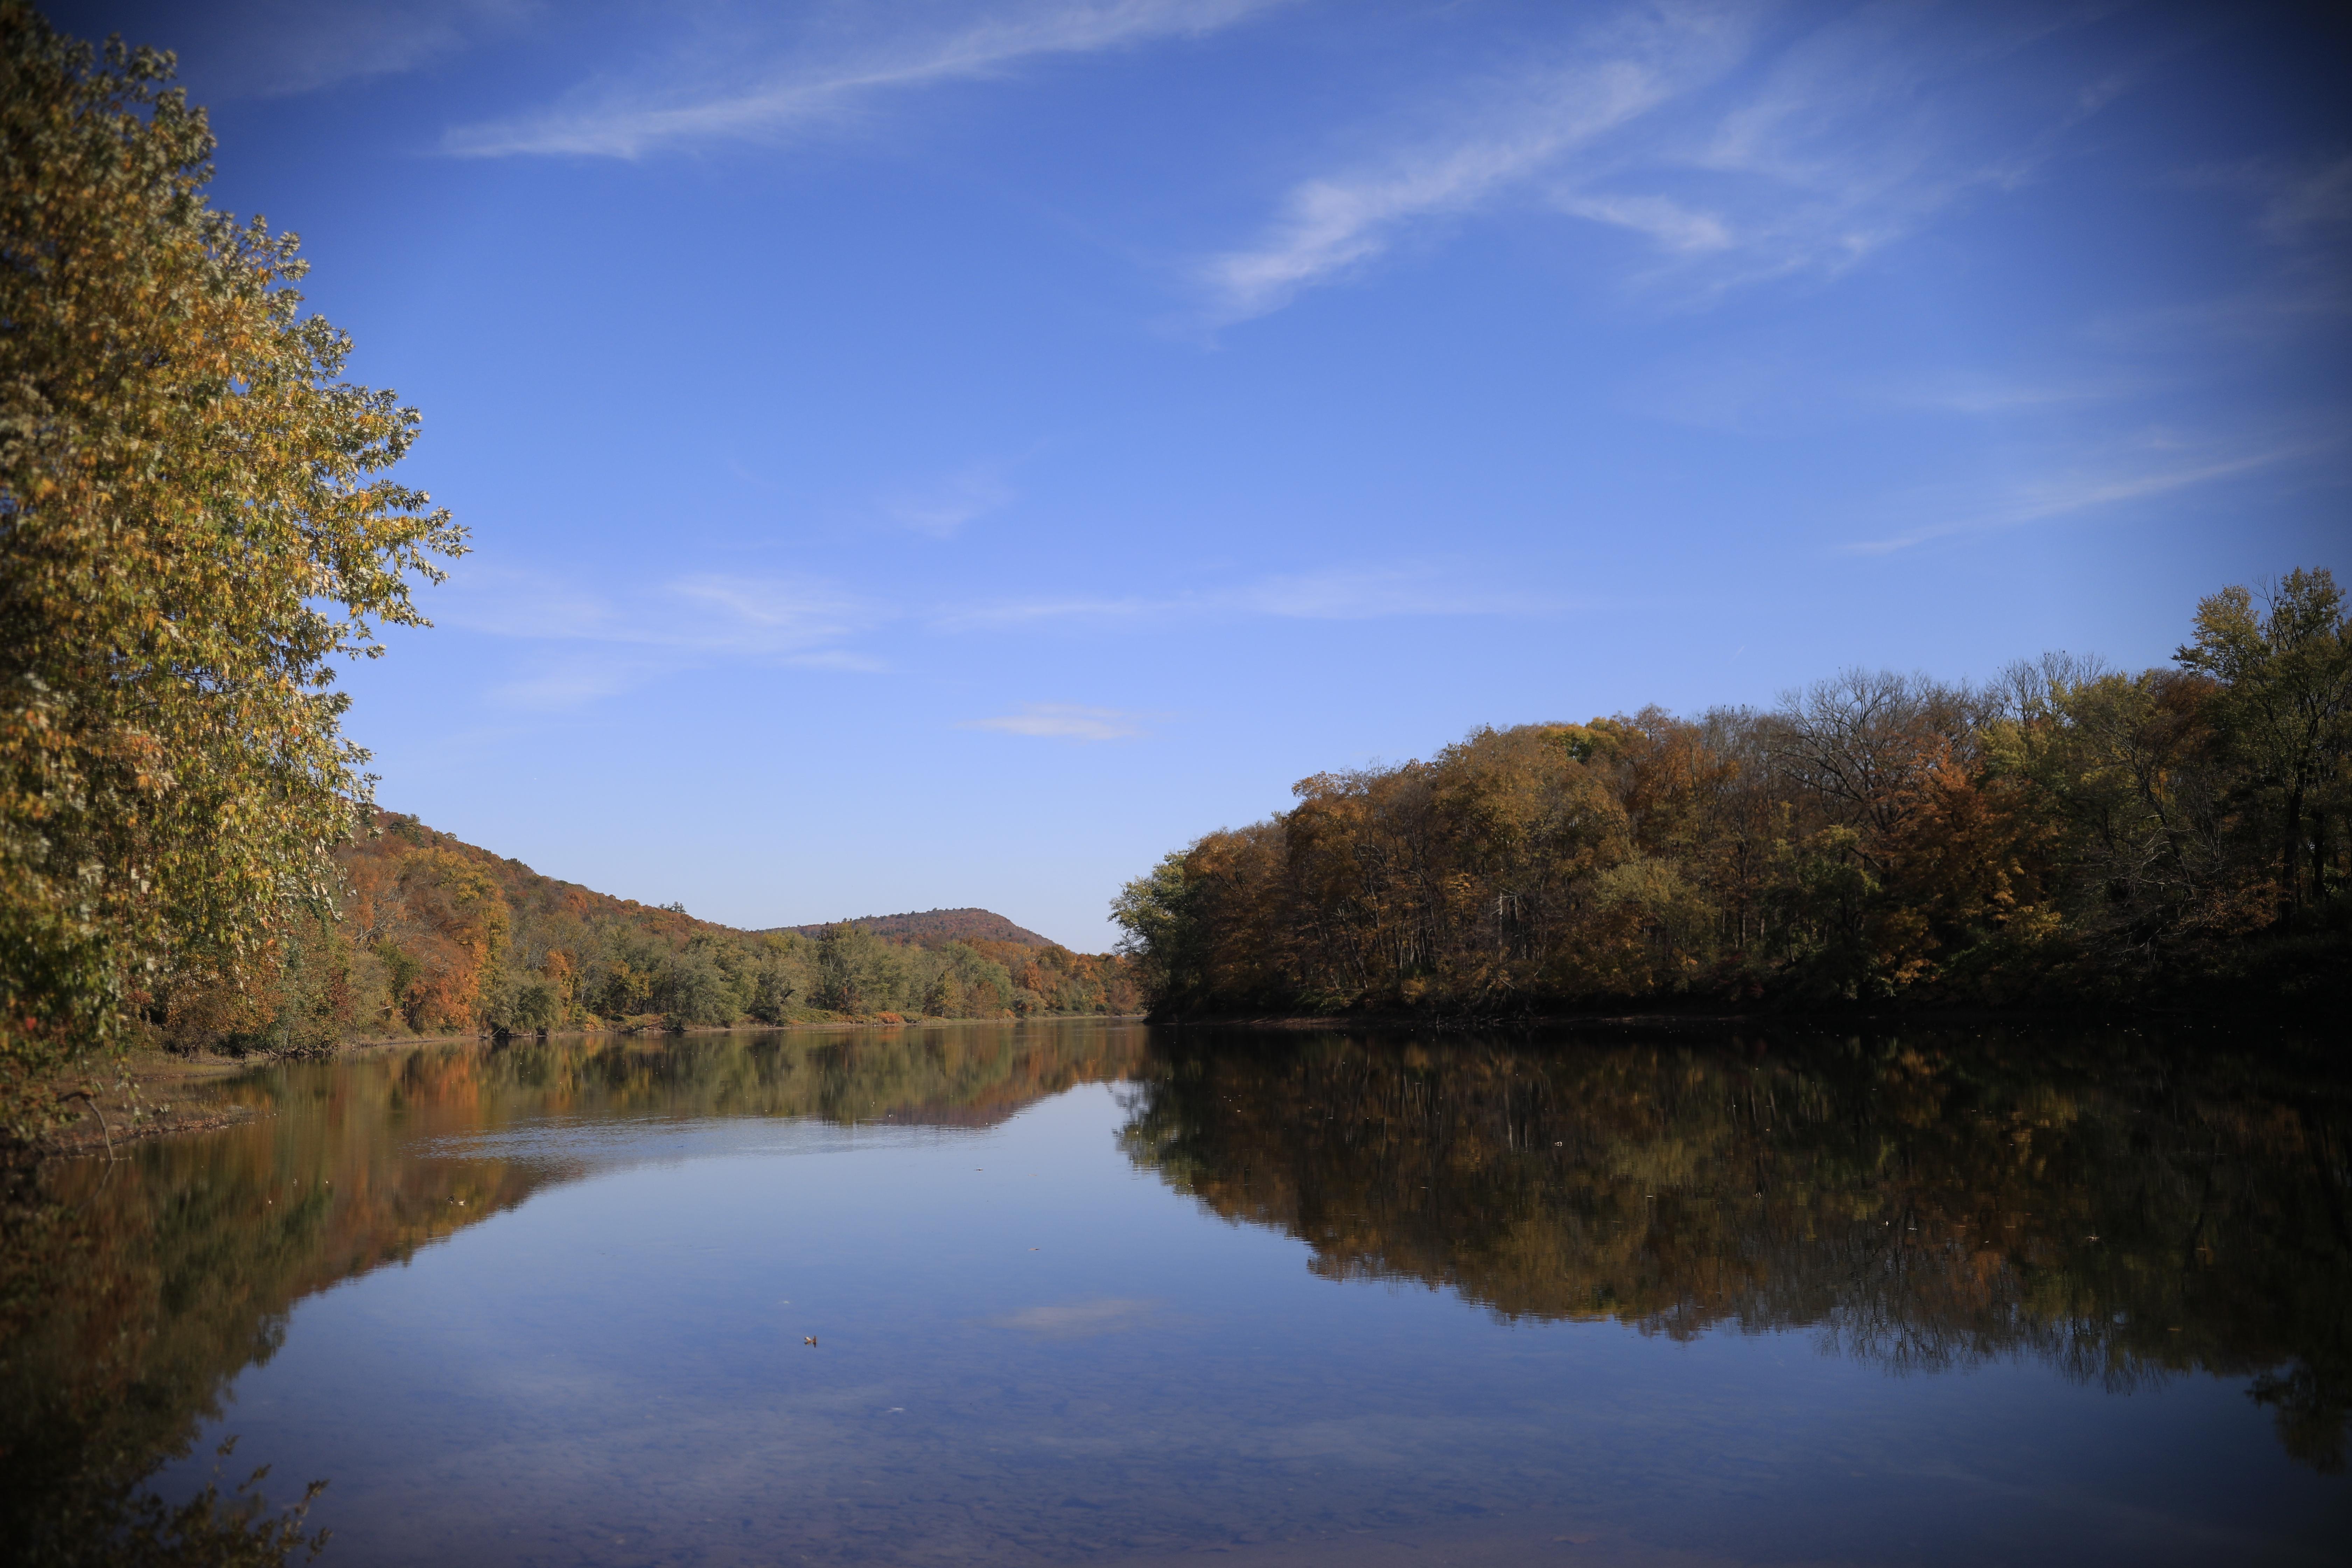 A view of the river from the Bushkill Access in the fall while the leaves are changing colors.